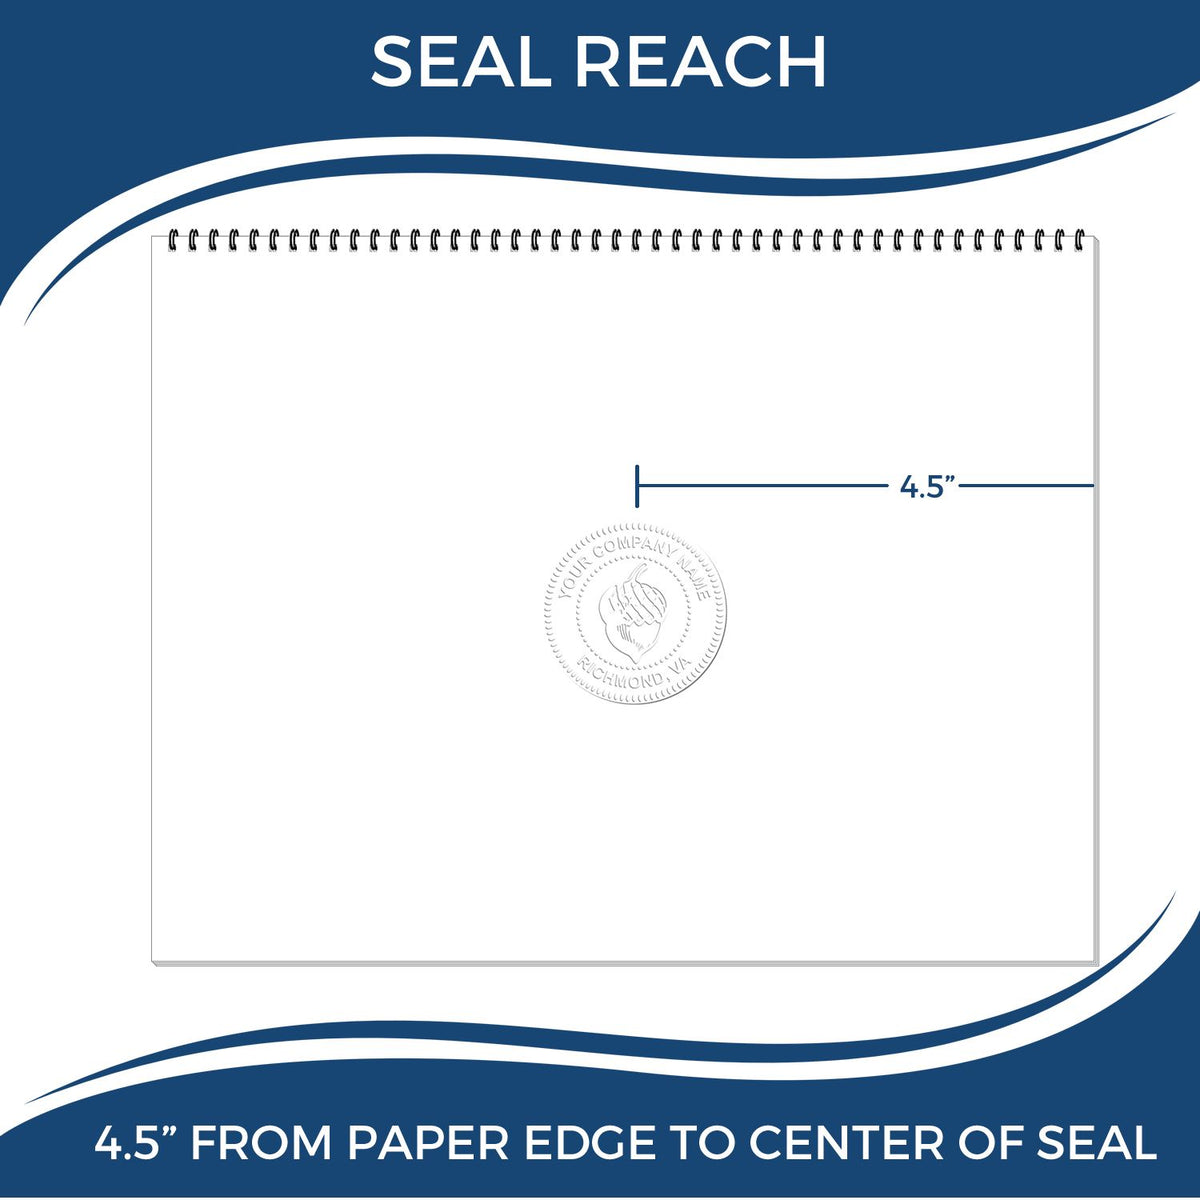 An infographic showing the seal reach which is represented by a ruler and a miniature seal image of the State of Pennsylvania Extended Long Reach Geologist Seal